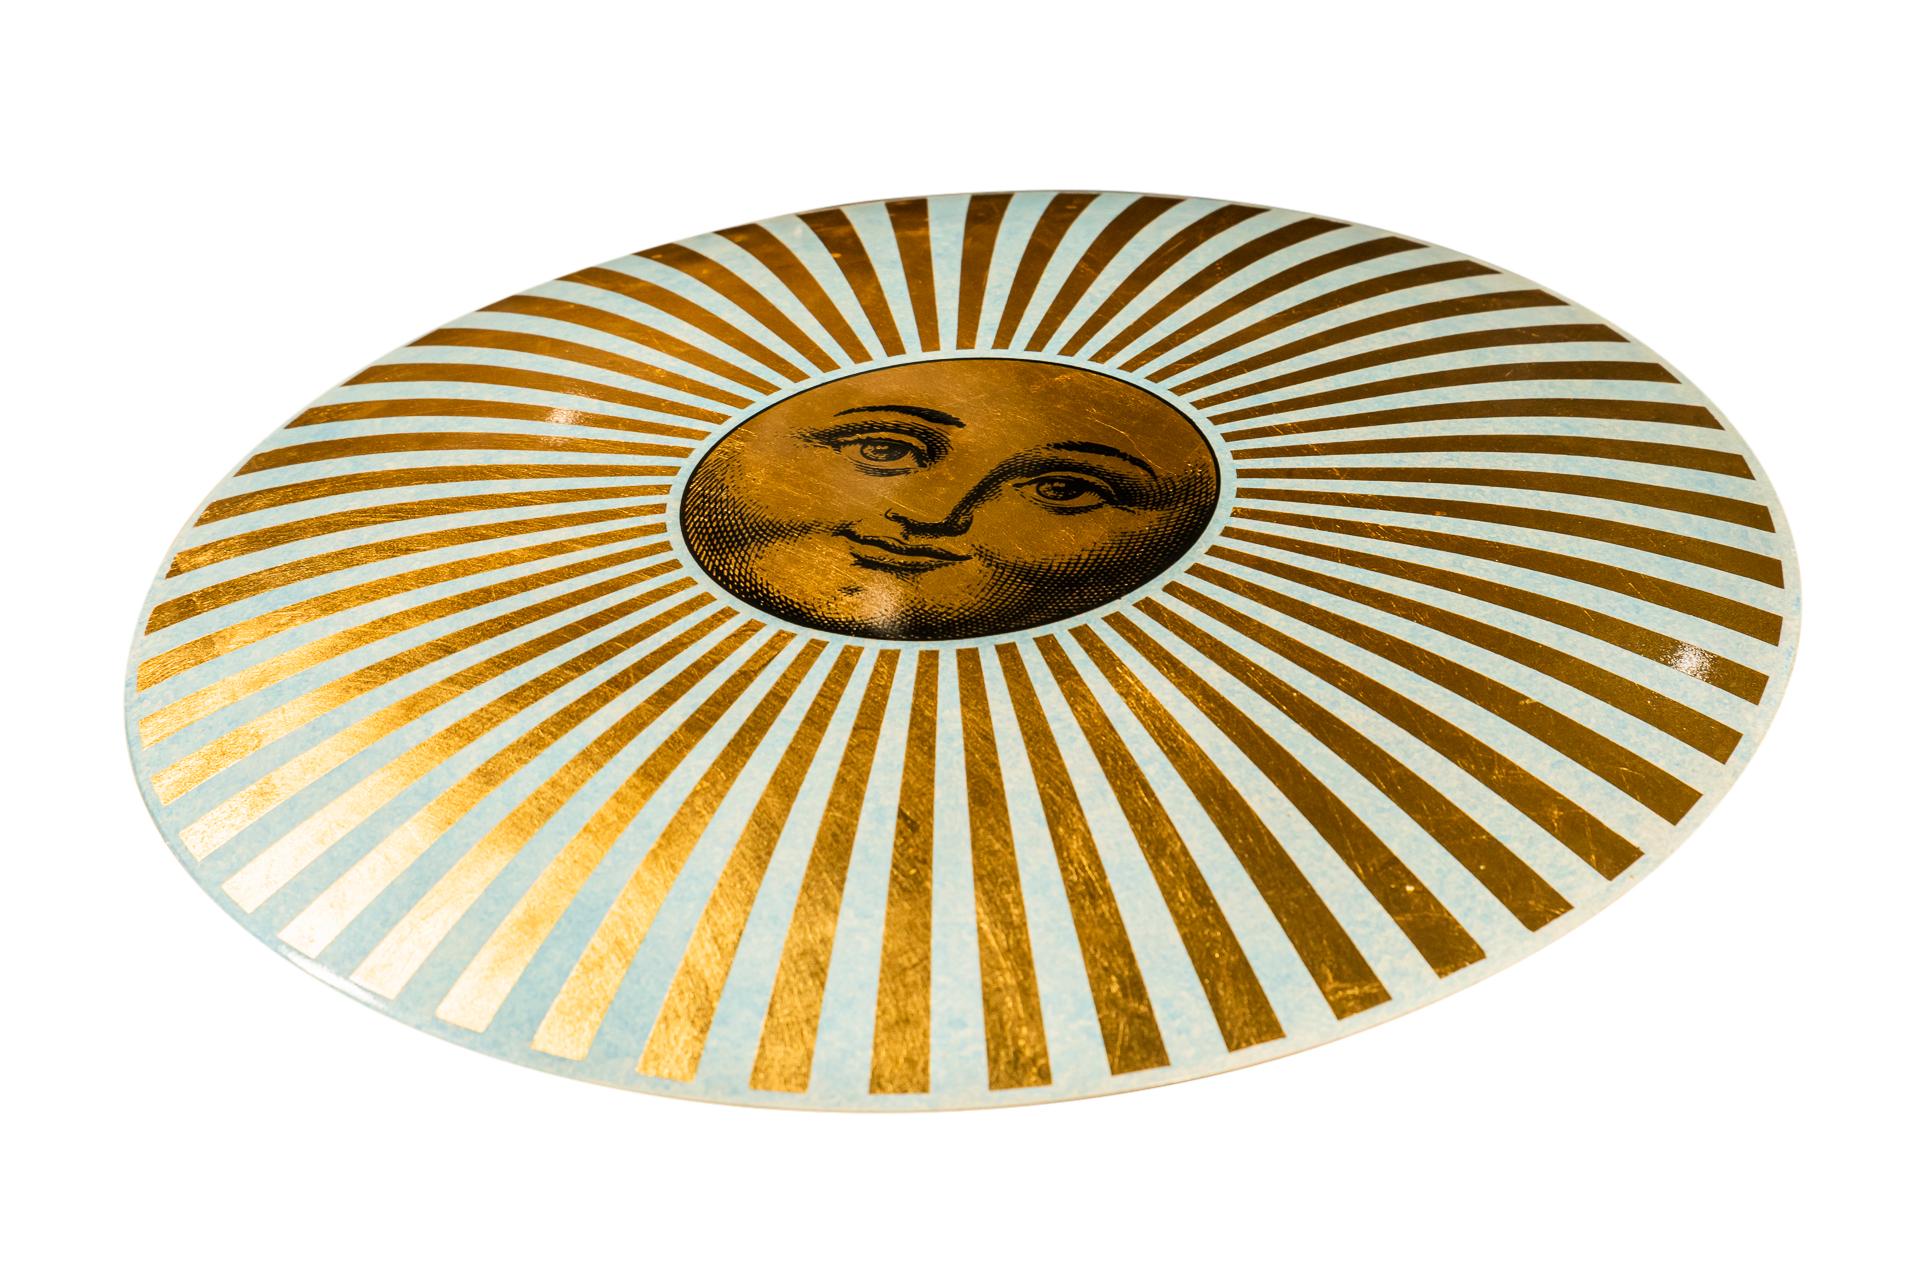 Piero Fornasetti (1913-1988),
Wall or ceiling lamp,
Silk-screened metal.
Prod. Fornasetti, manufacturer's label on the back,
Italy, circa 1970.

Measures: Height 15 cm, diameter 50 cm.